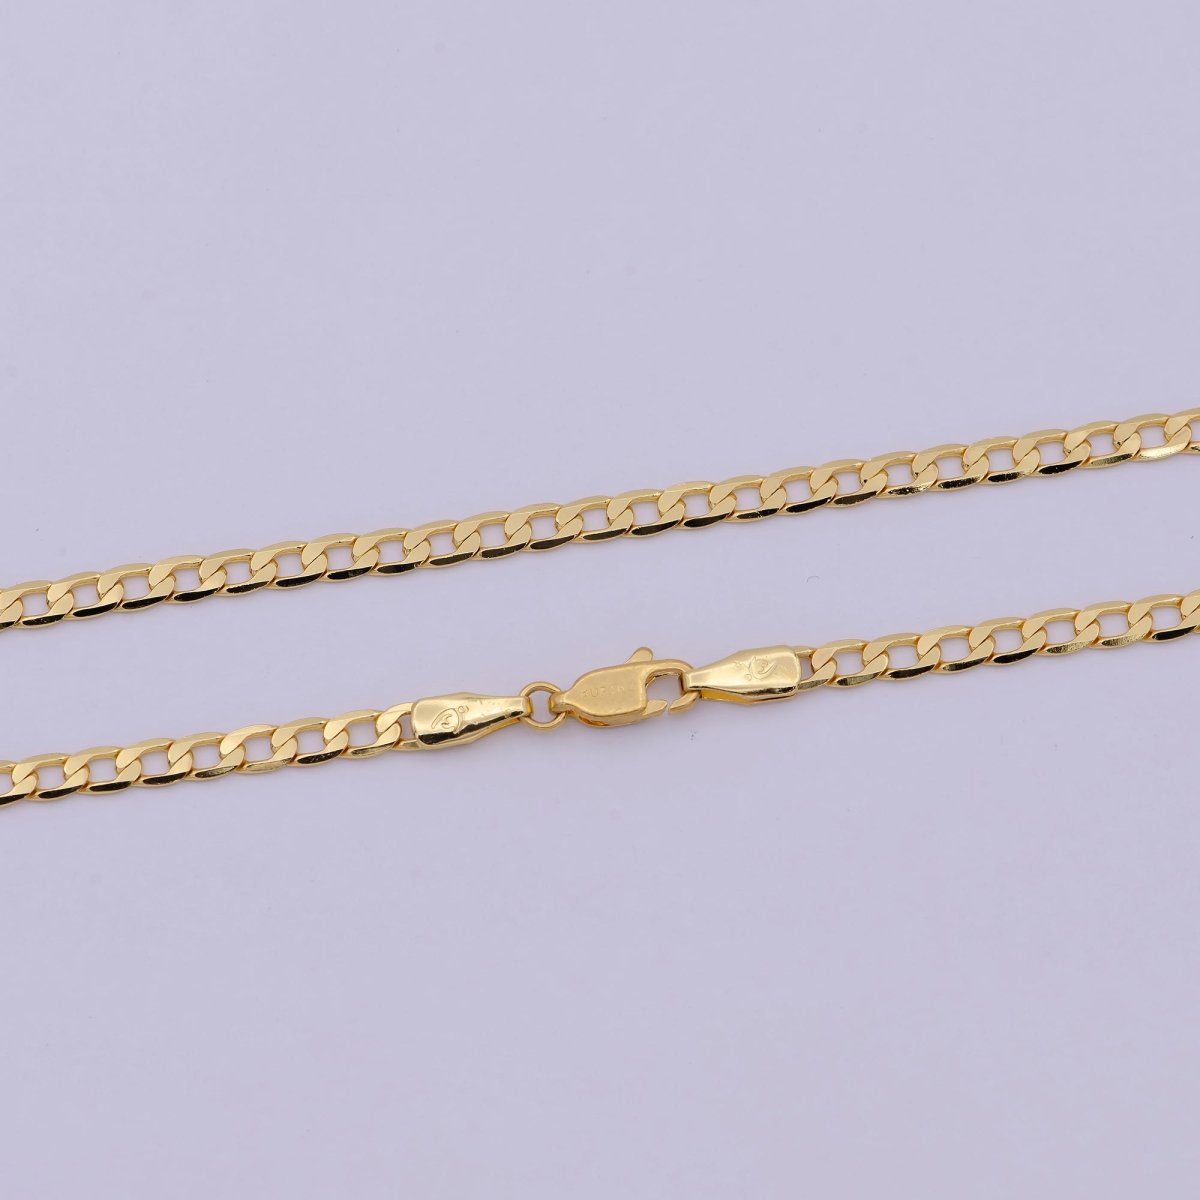 24K Gold Filled Cuban Link Chain Necklace 18 inch Miami Cuban, 3.2mm Gold Chain, Curb Link, Men Women Chain Necklaces | WA-523 Clearance Pricing - DLUXCA